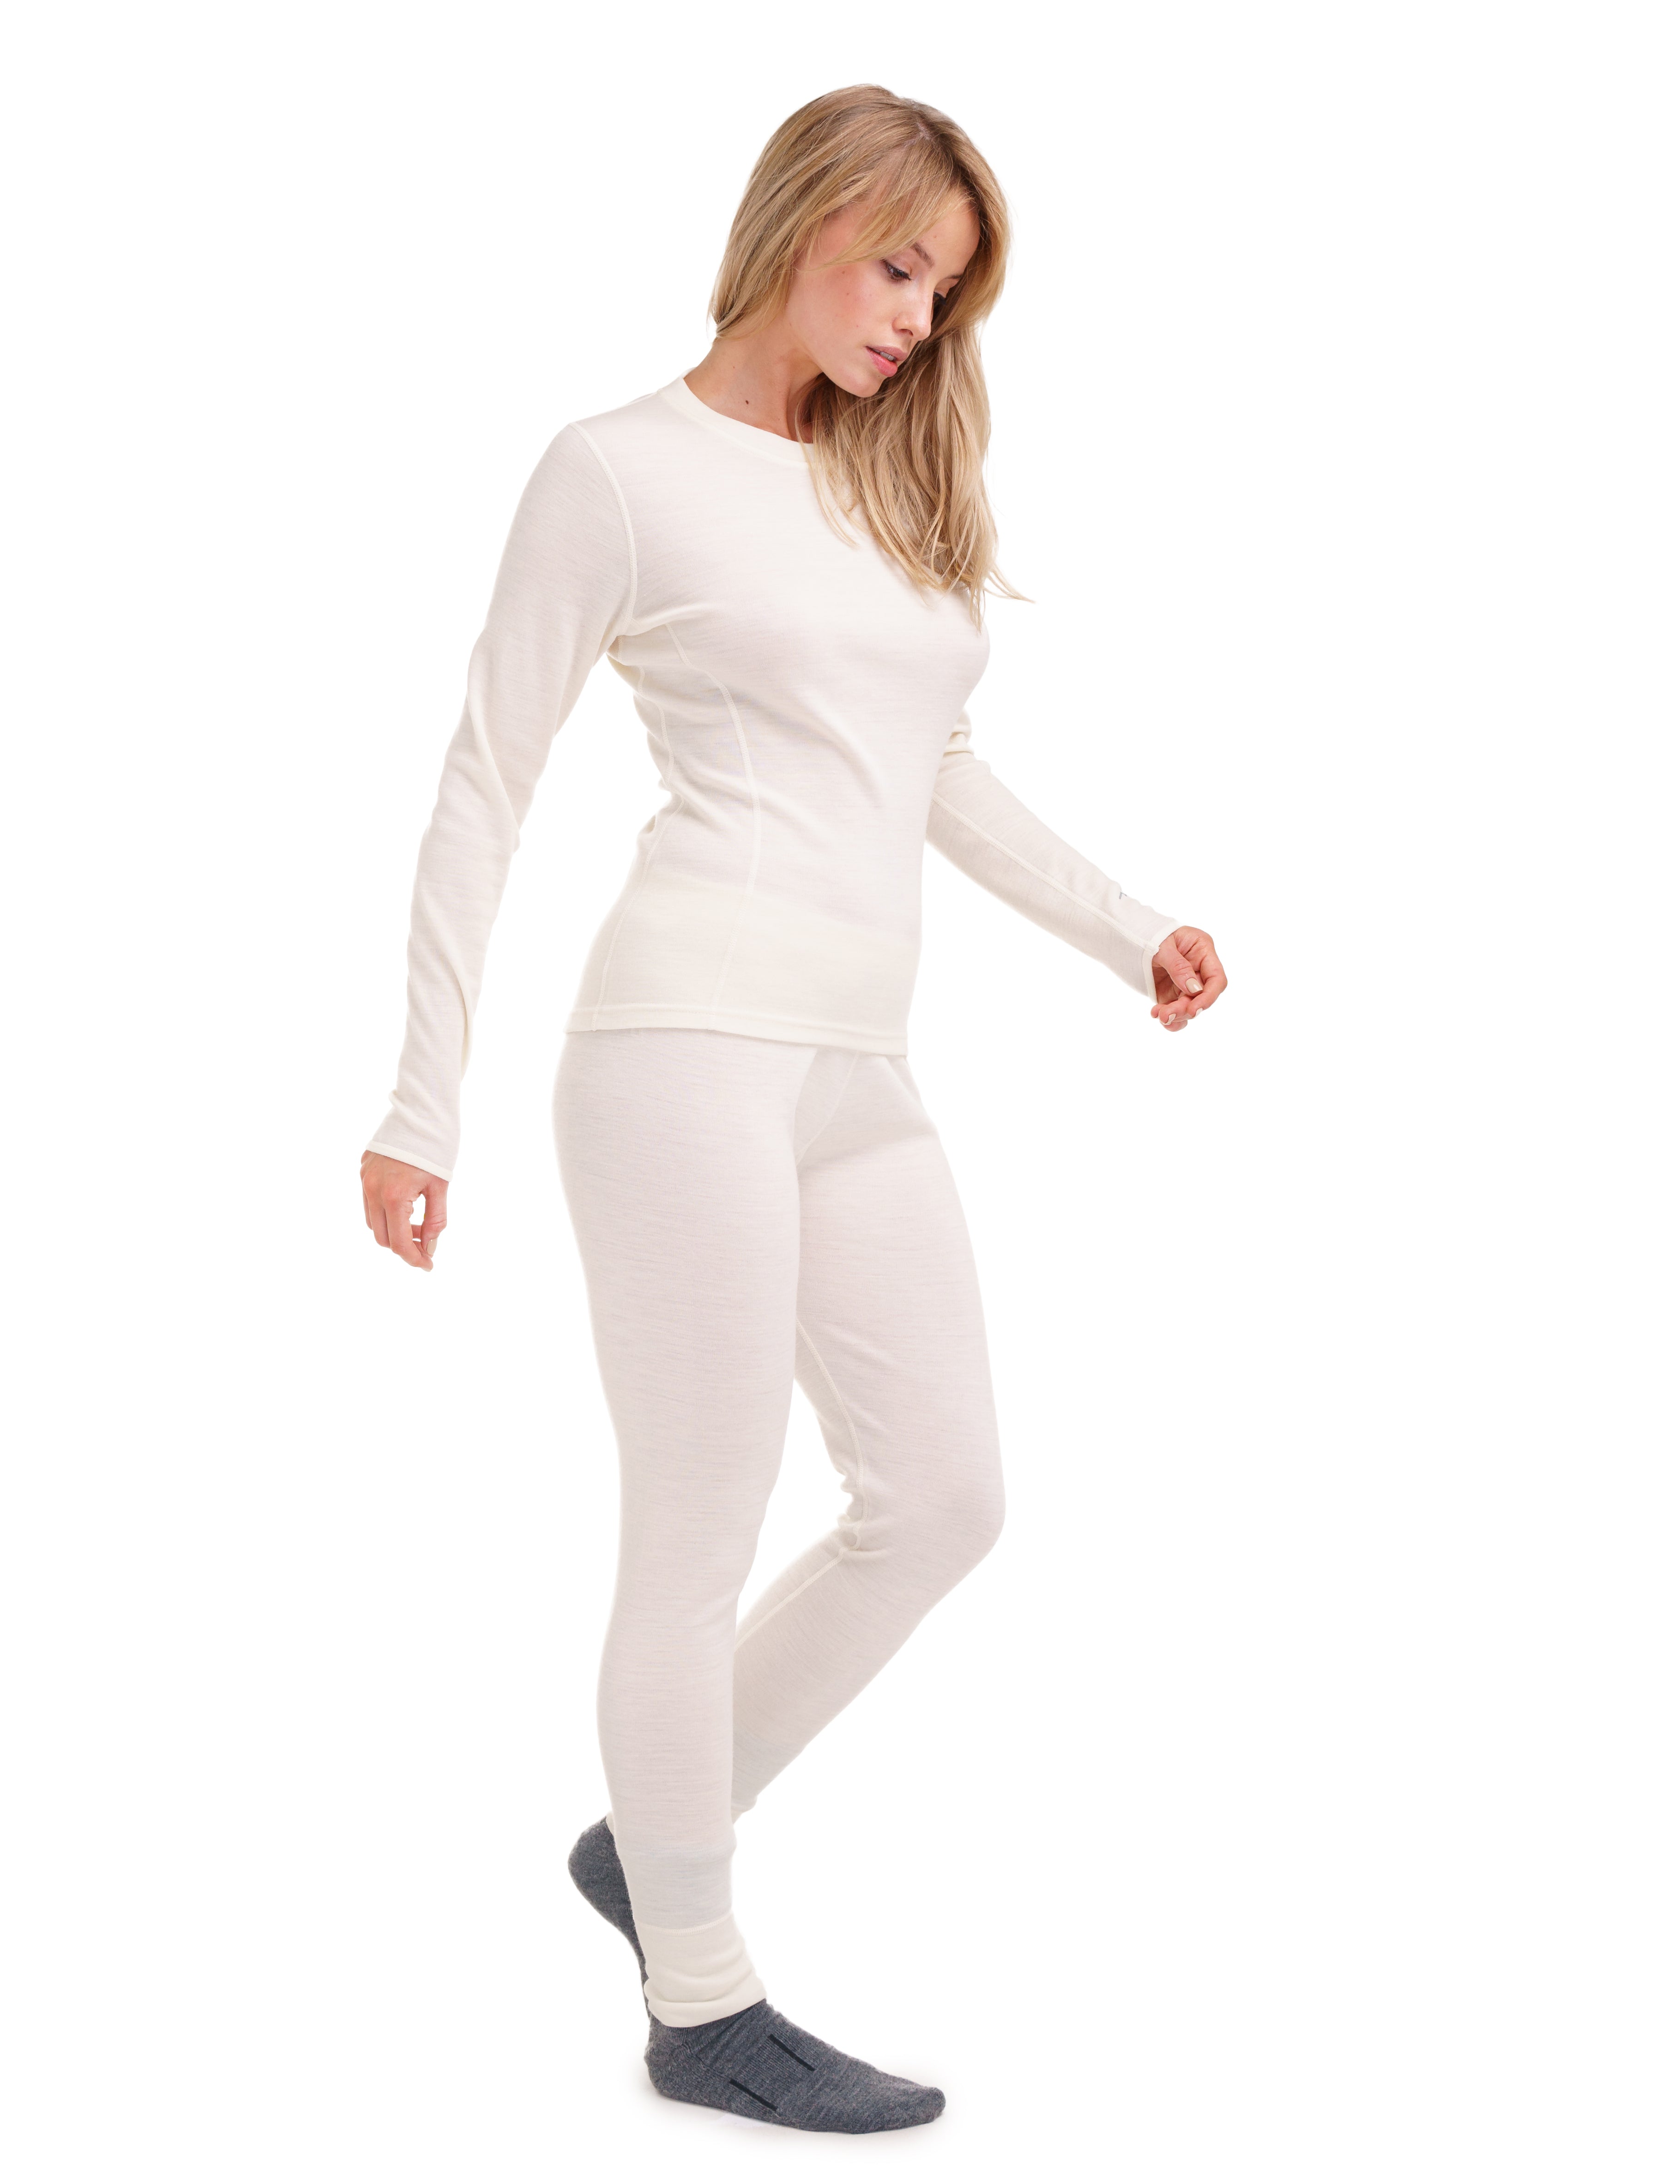 Aueoeo Women Thermal Set, Thermal Set for Women Women's Thermal